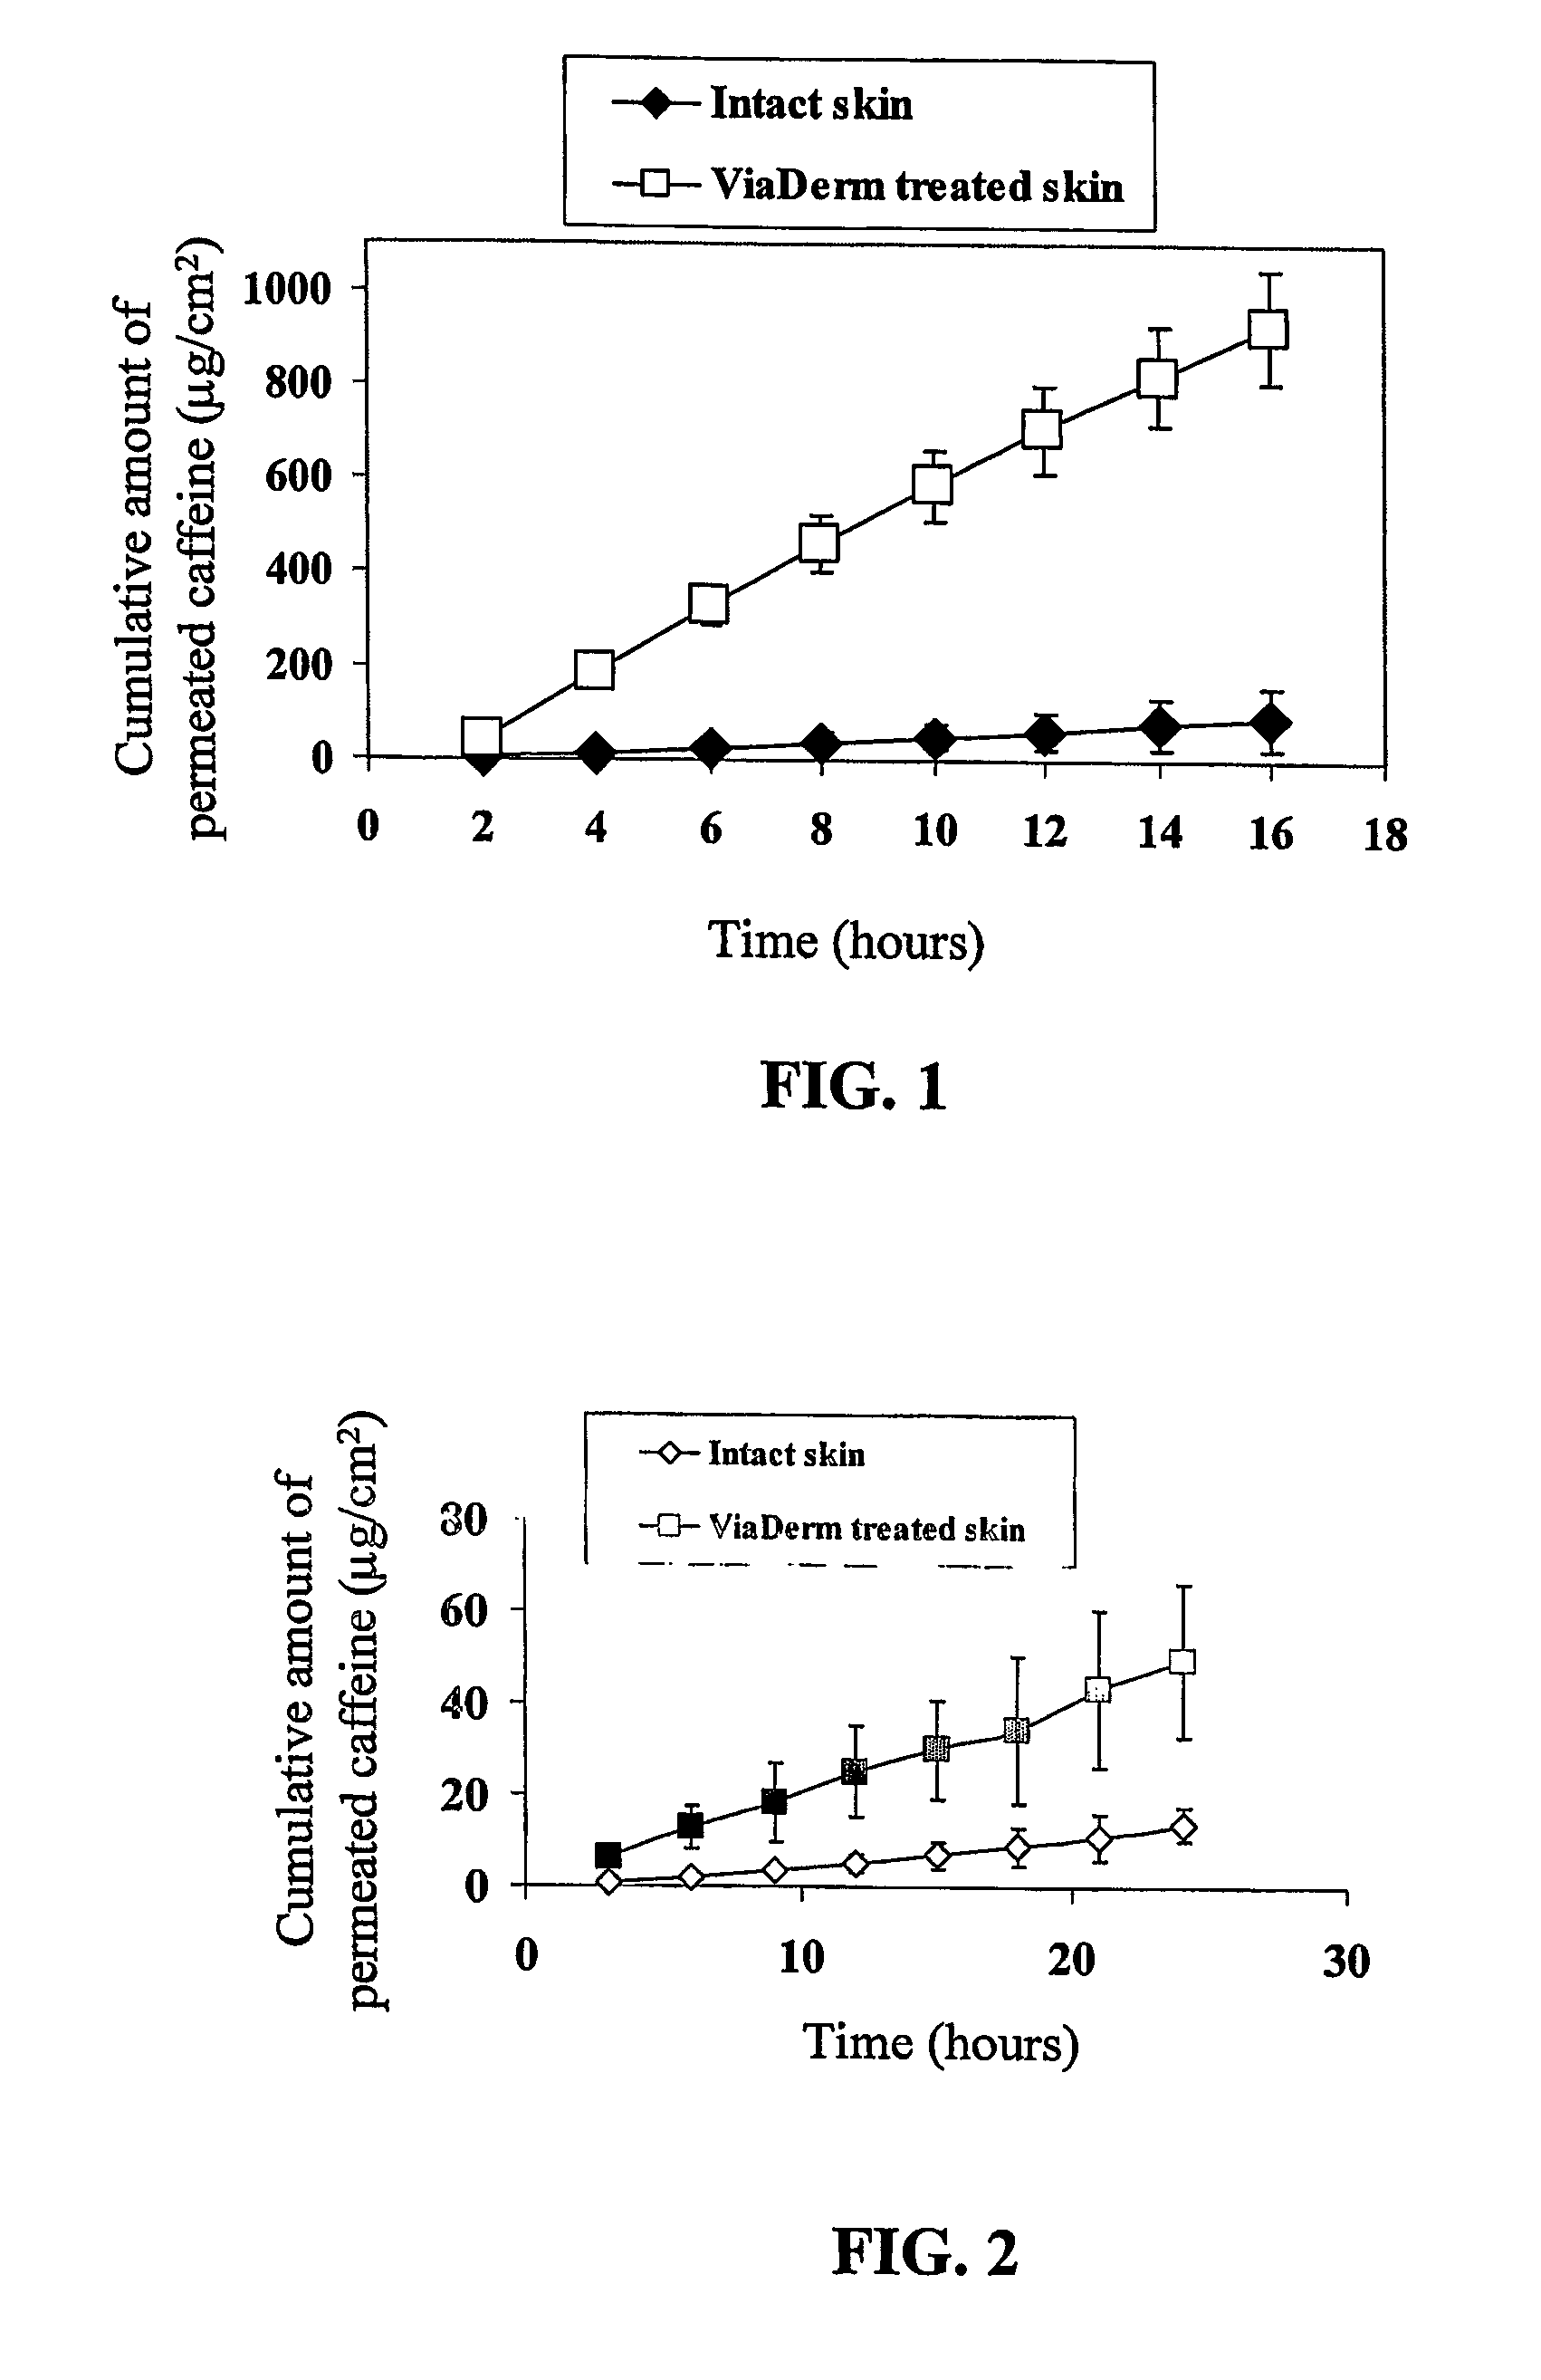 Transdermal Delivery System for Cosmetic Agents